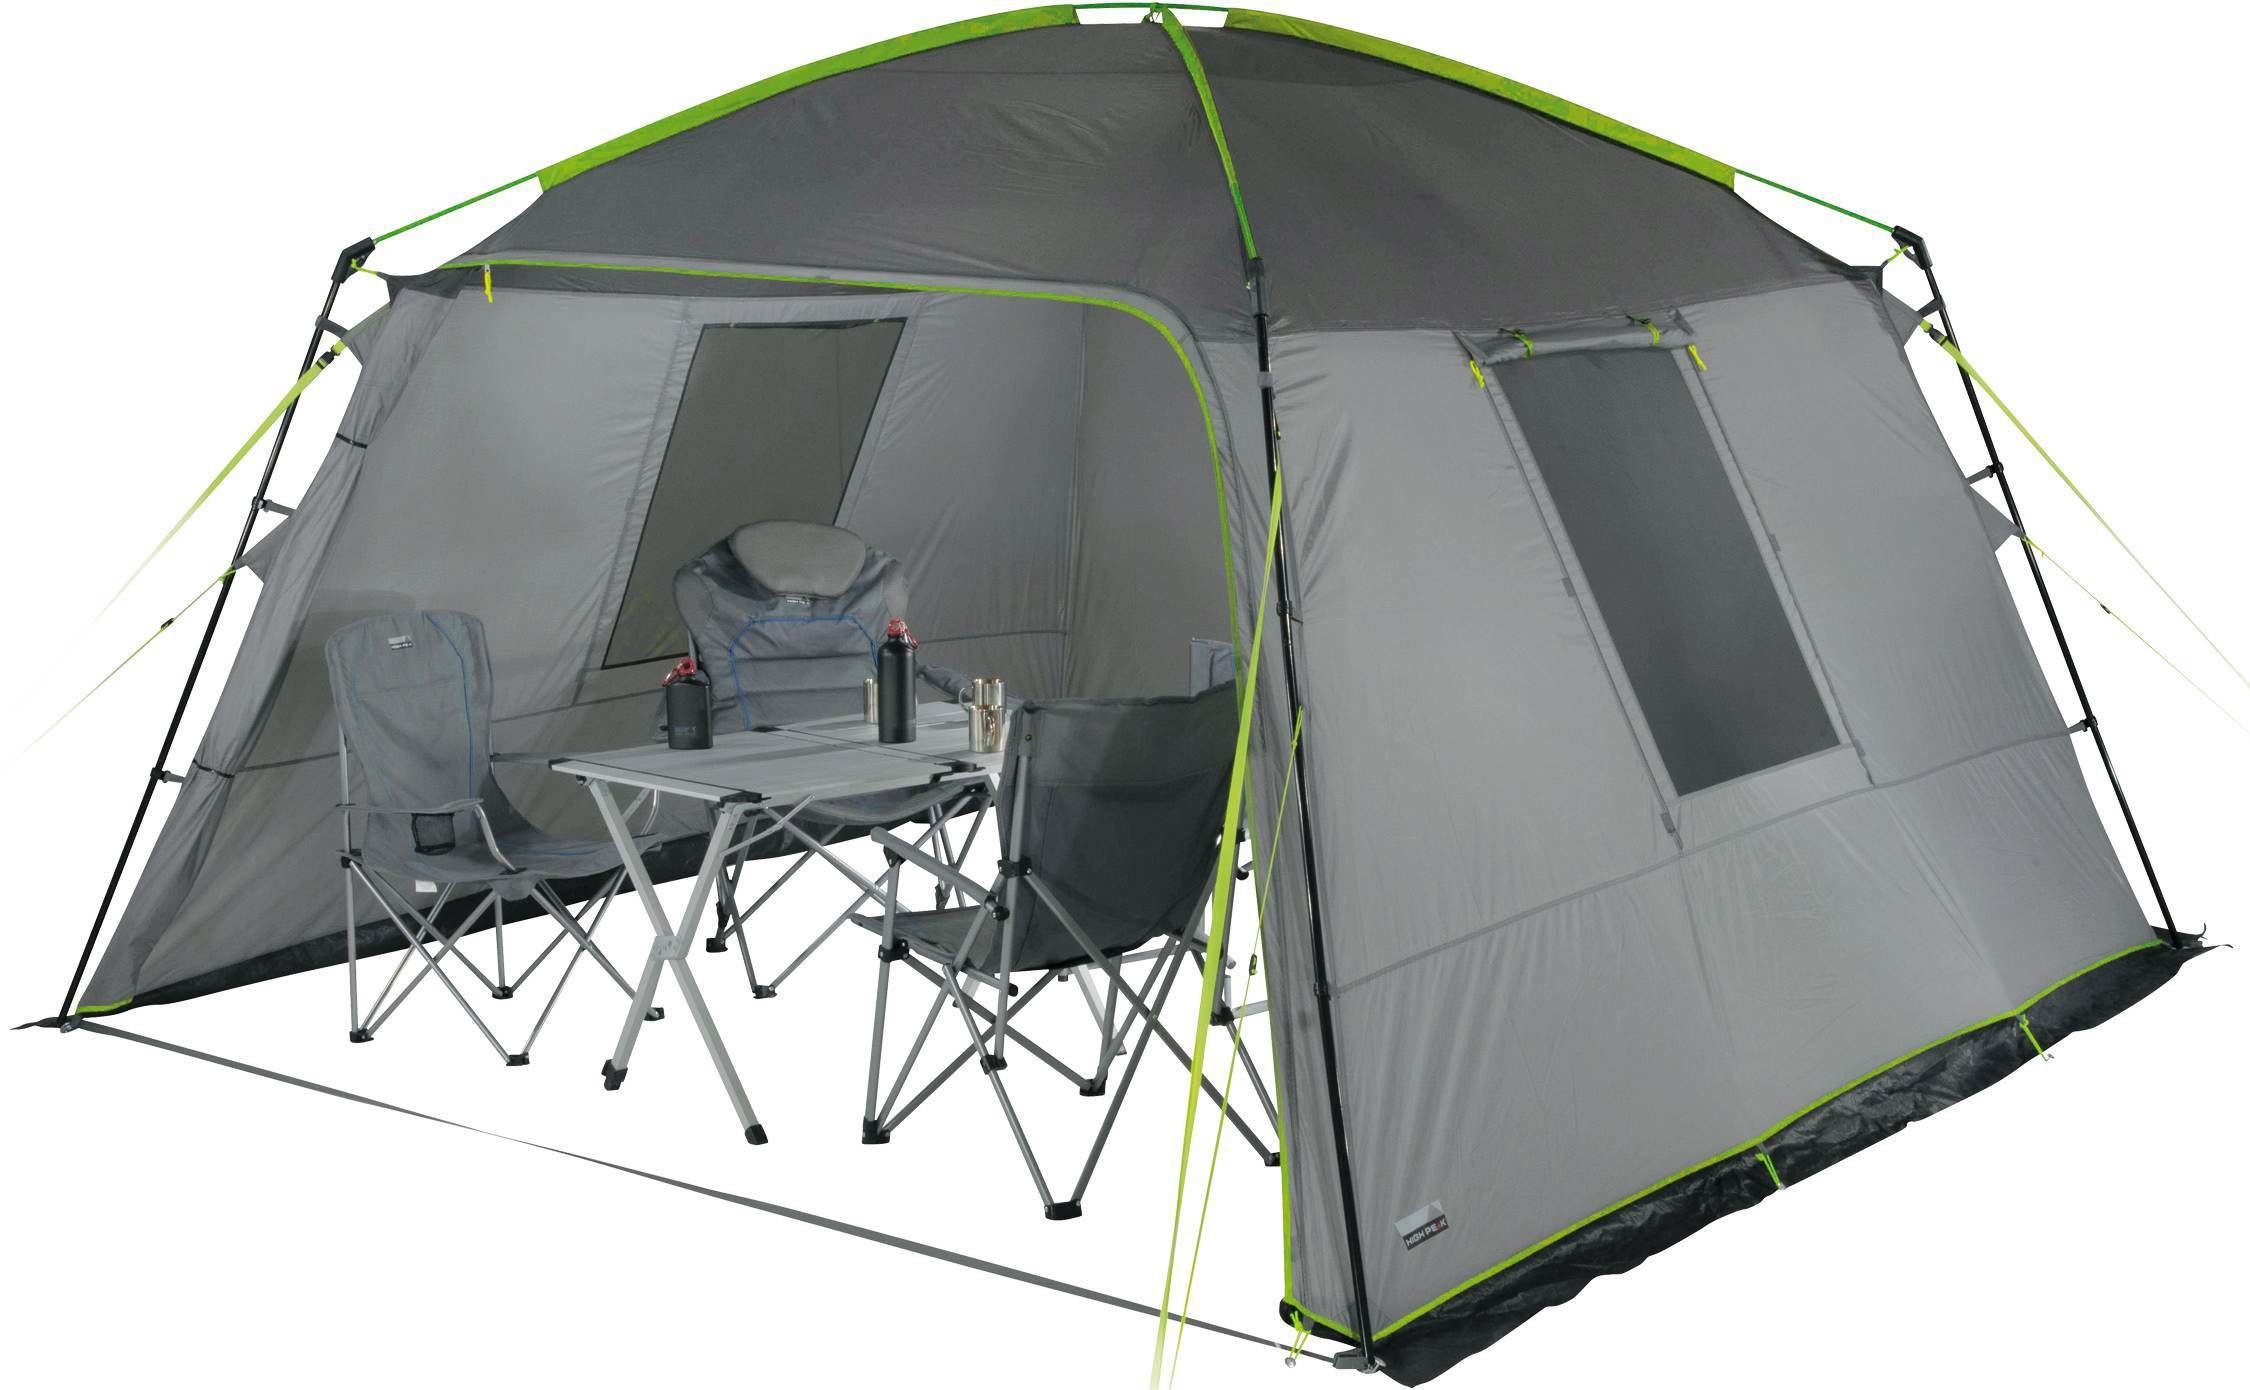 Camping Pavillons online kaufen | OTTO